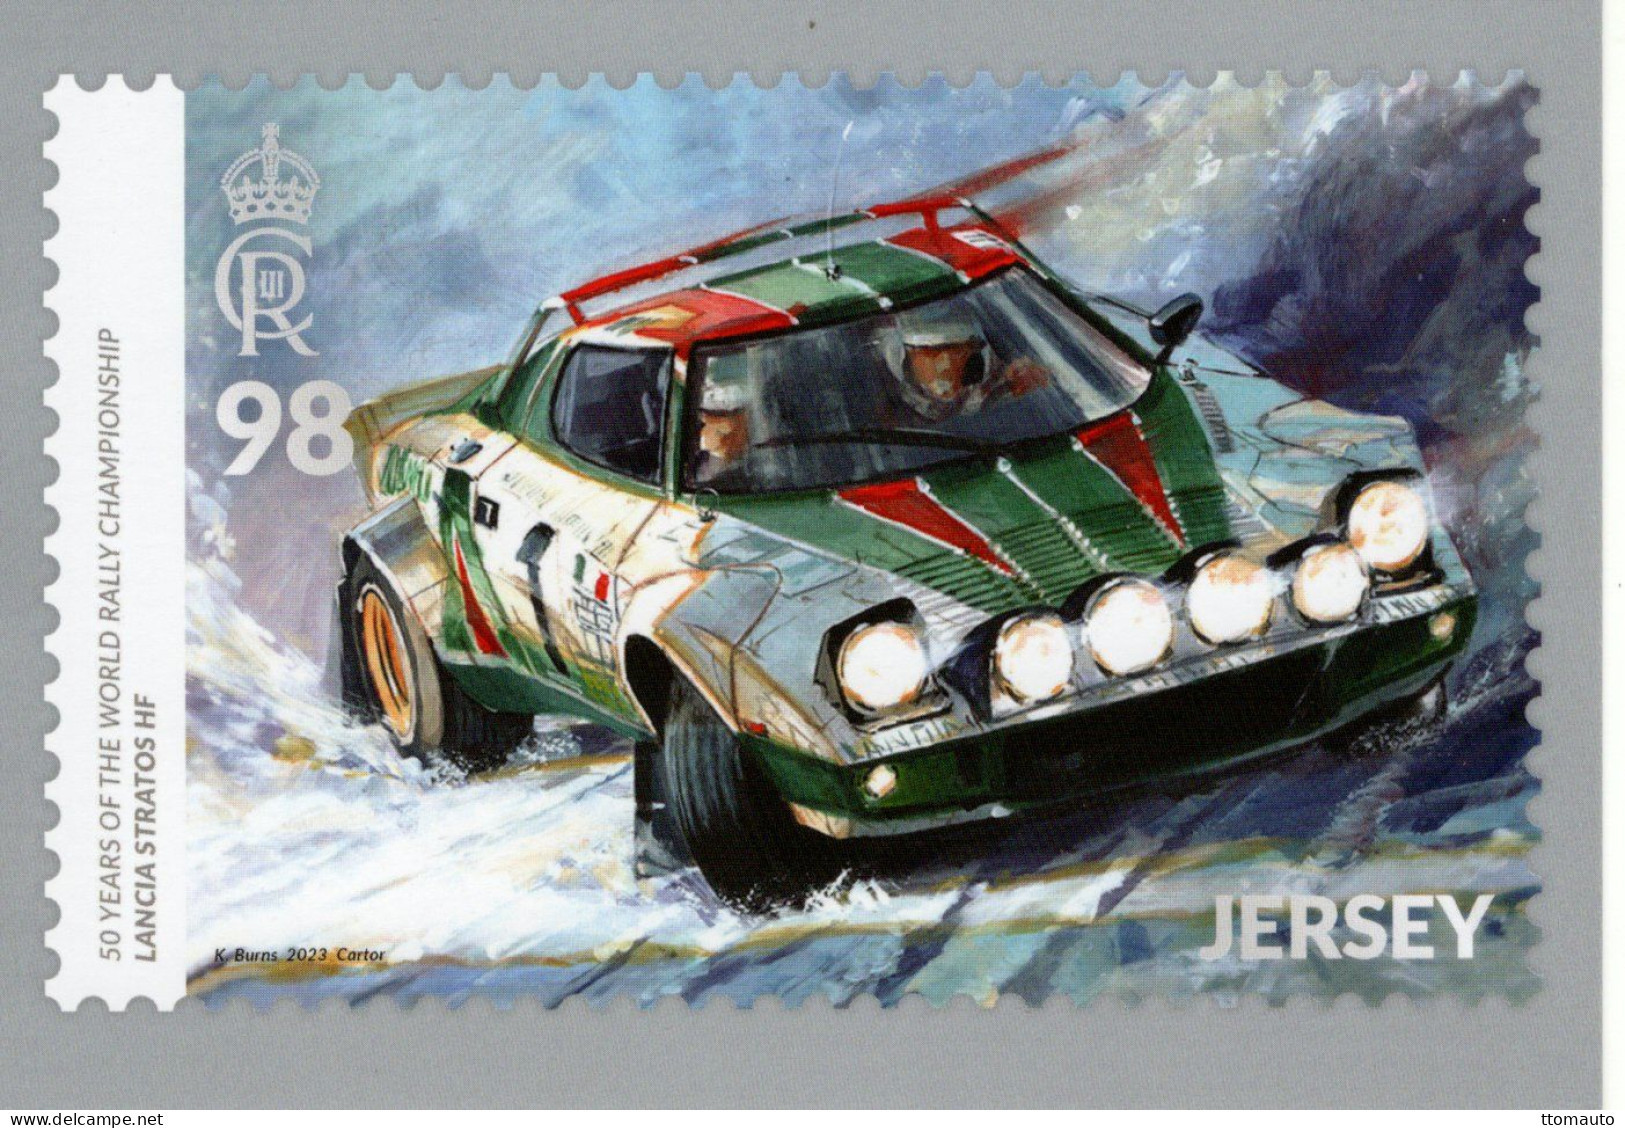 Lancia Stratos HF -  50 Years Of The World Rally Championship  - Jersey PHQ Postcard - CPM - Rallyes